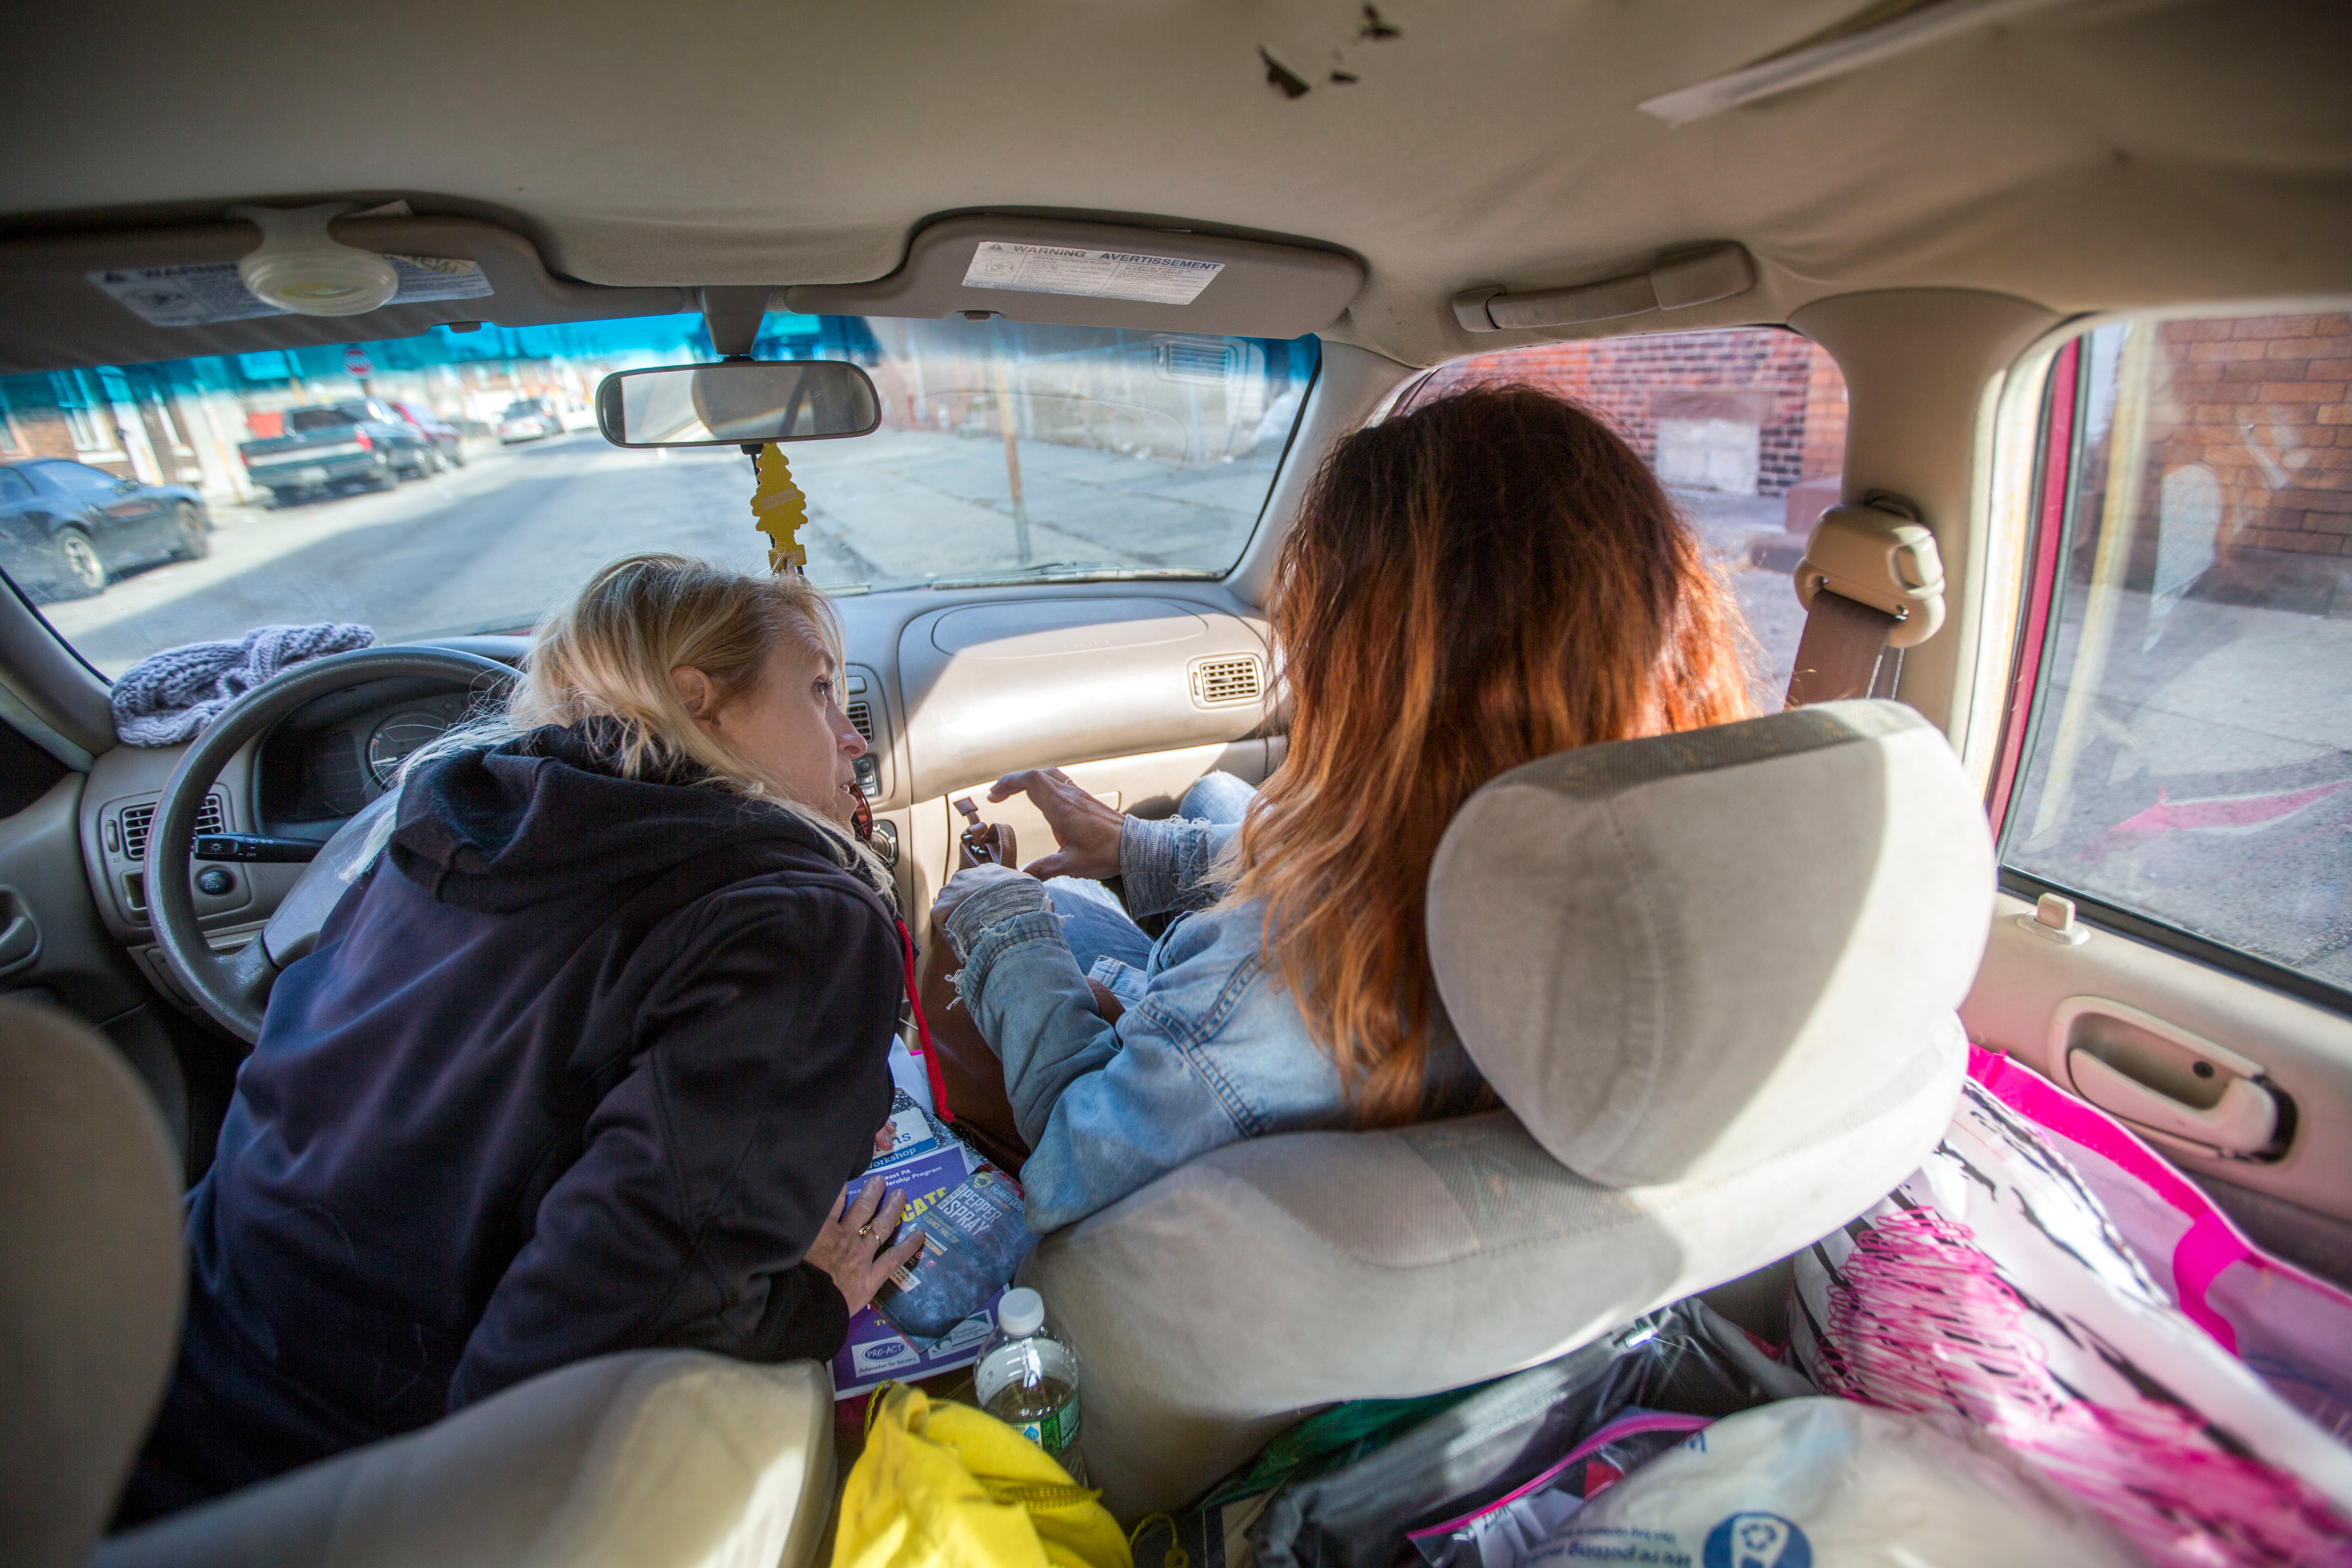 Carol Rostucher (left) and Barb Burns ride through the Kensington neighborhood of Philadelphia doing outreach to the homeless and those struggling with addiction. Rostucher started the non-profit Angels in Motion. (Jessica Kourkounis/For Keystone Crossroads)